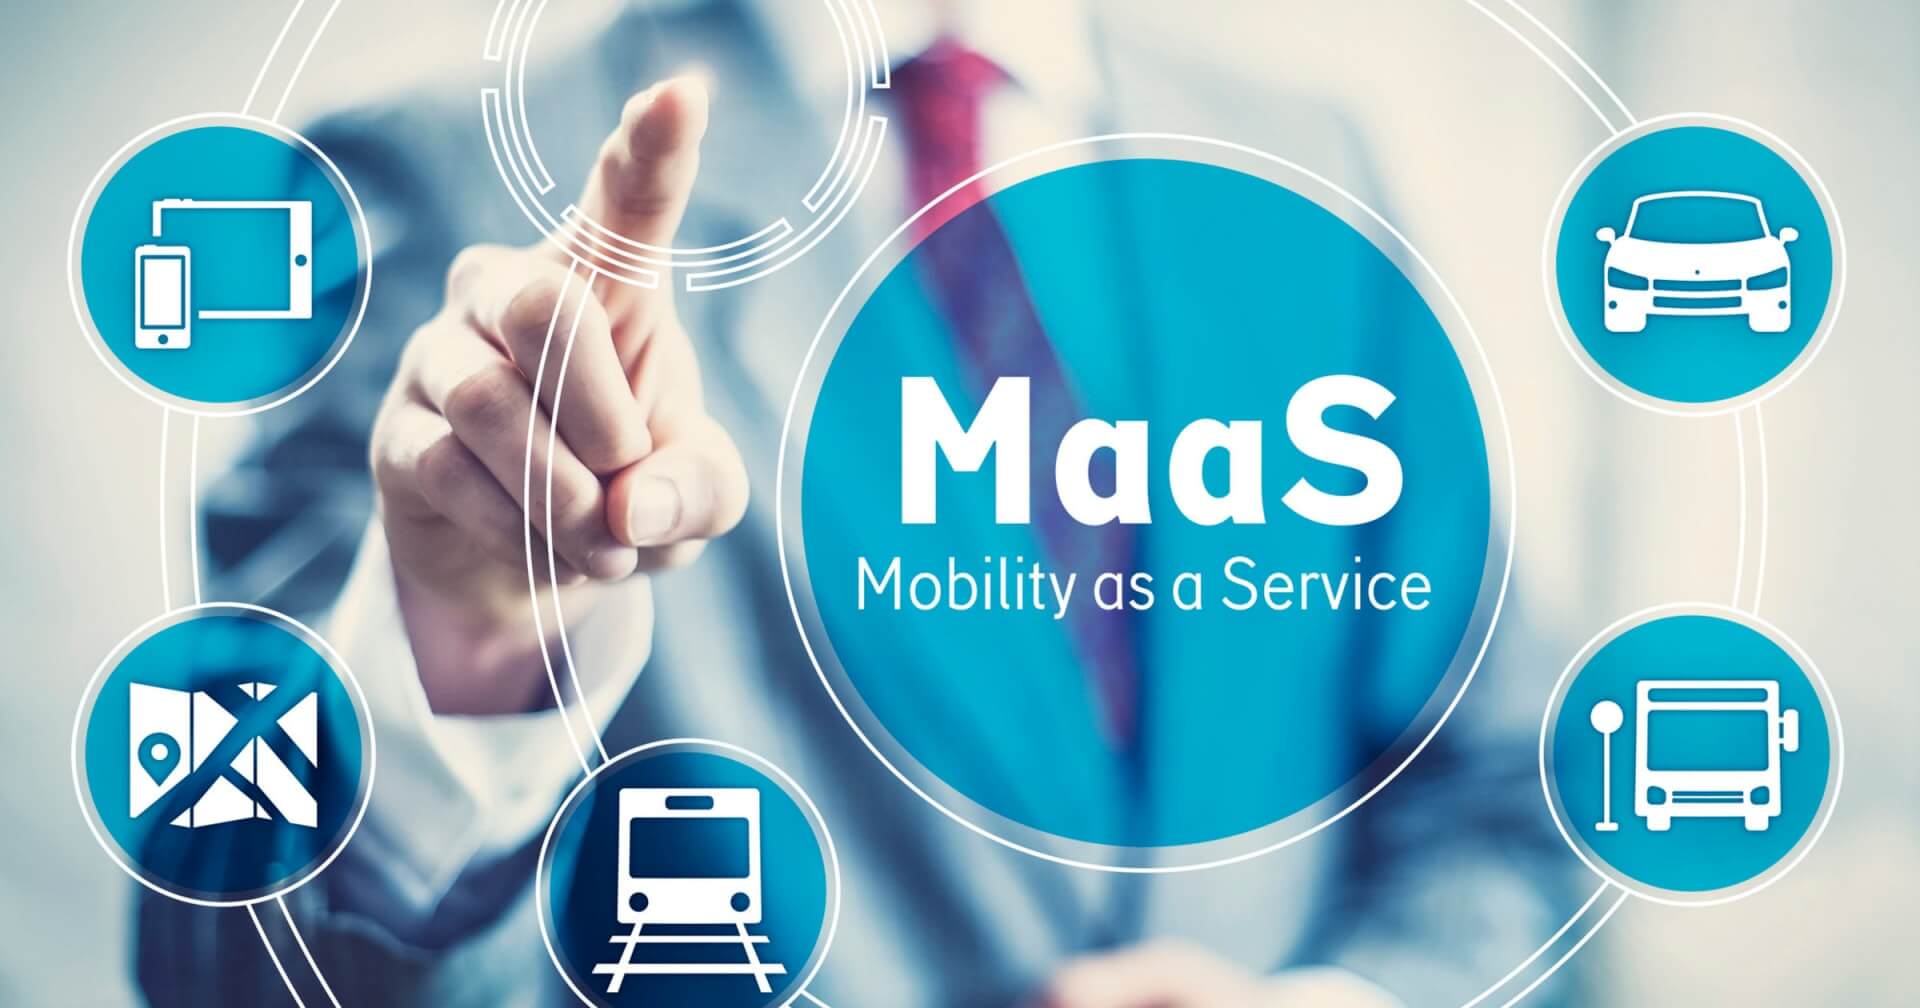 maas - mobility as a service